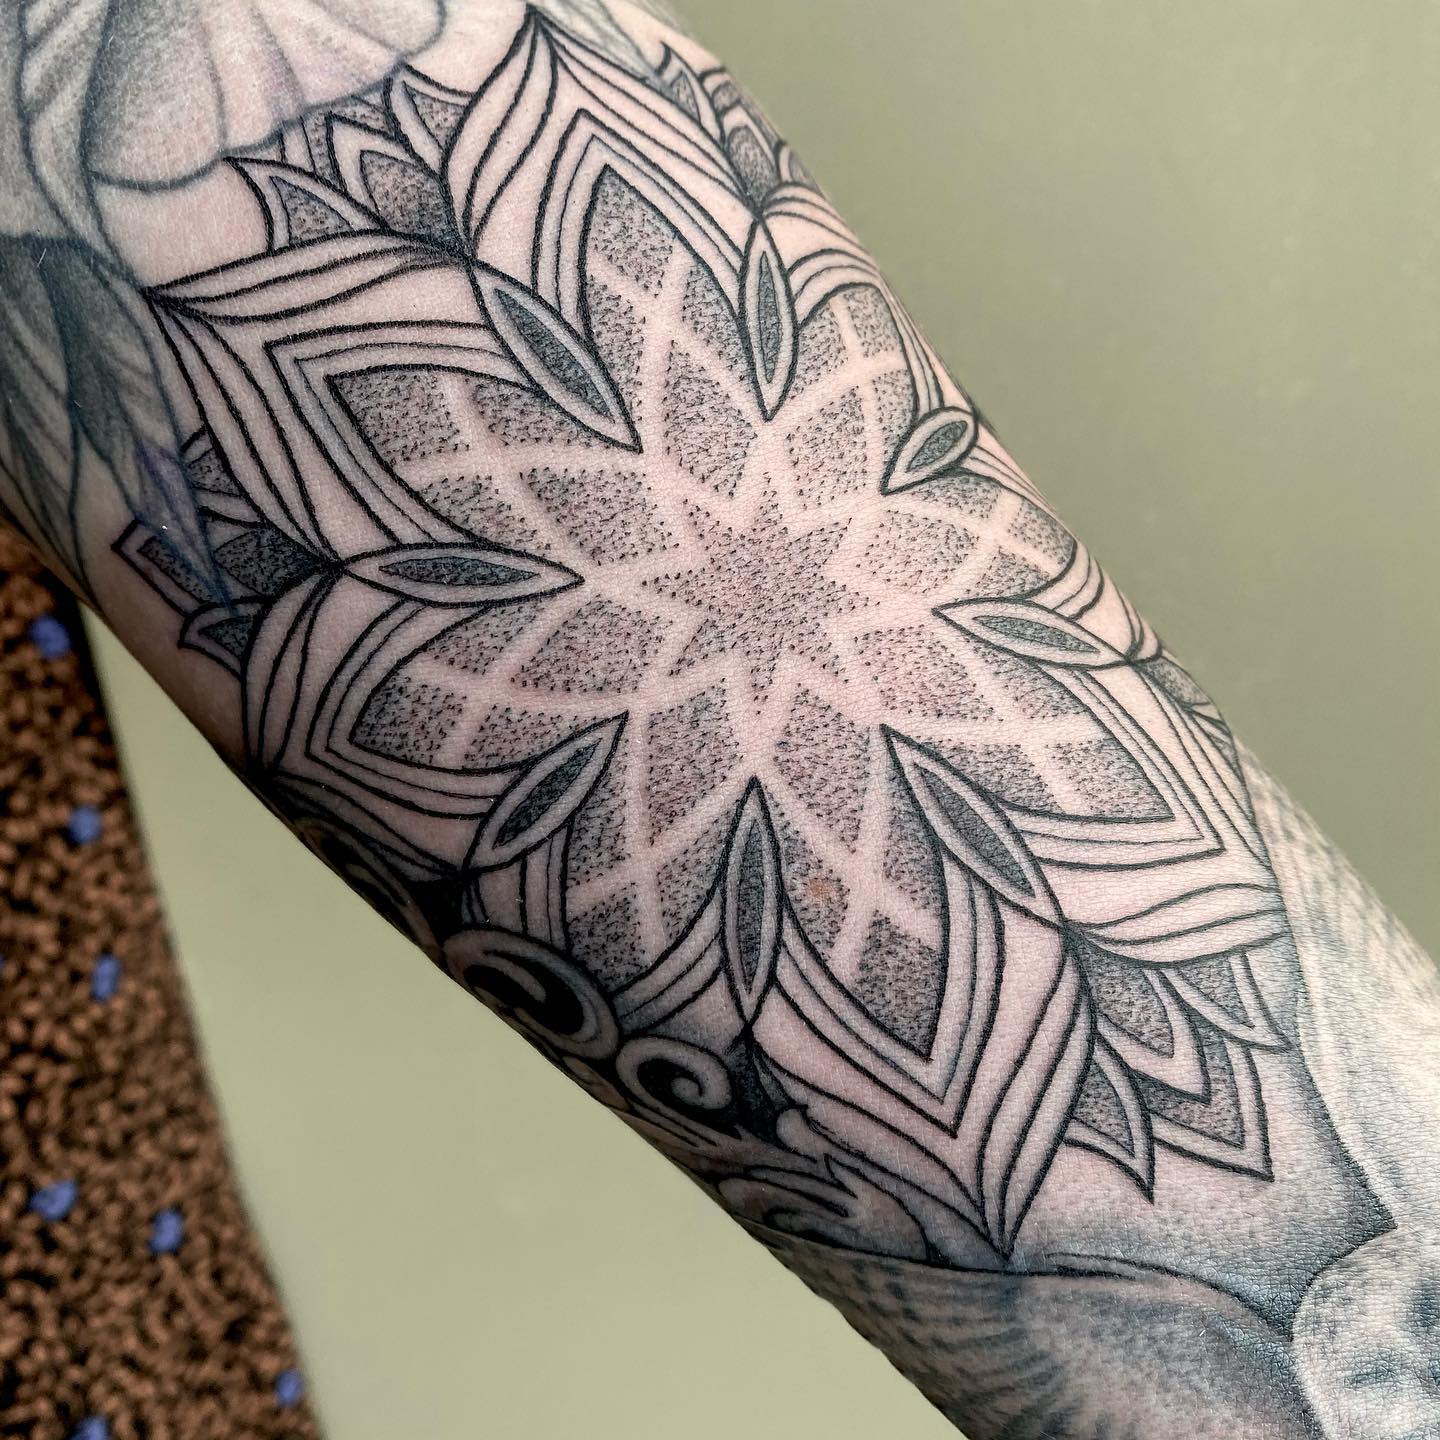 A cool mandala design tattoo on sleeve is all you need to take your dotwork tattoo to a whole different level. It covers all of your sleeve and looks amazing.